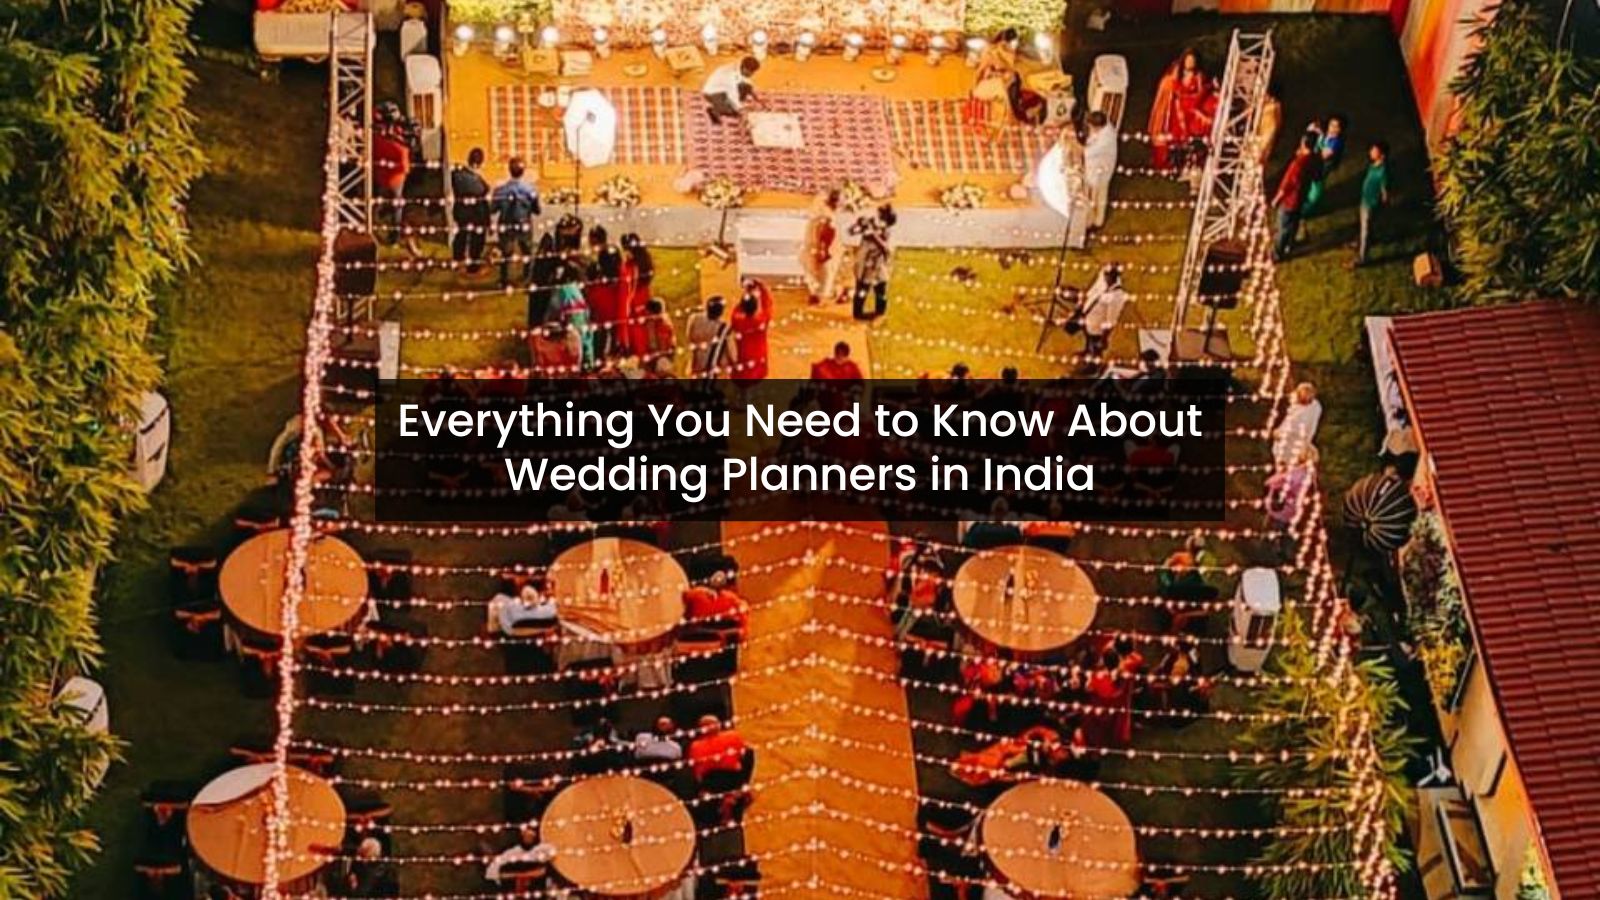 Everything You Need to Know About Wedding Planners in India